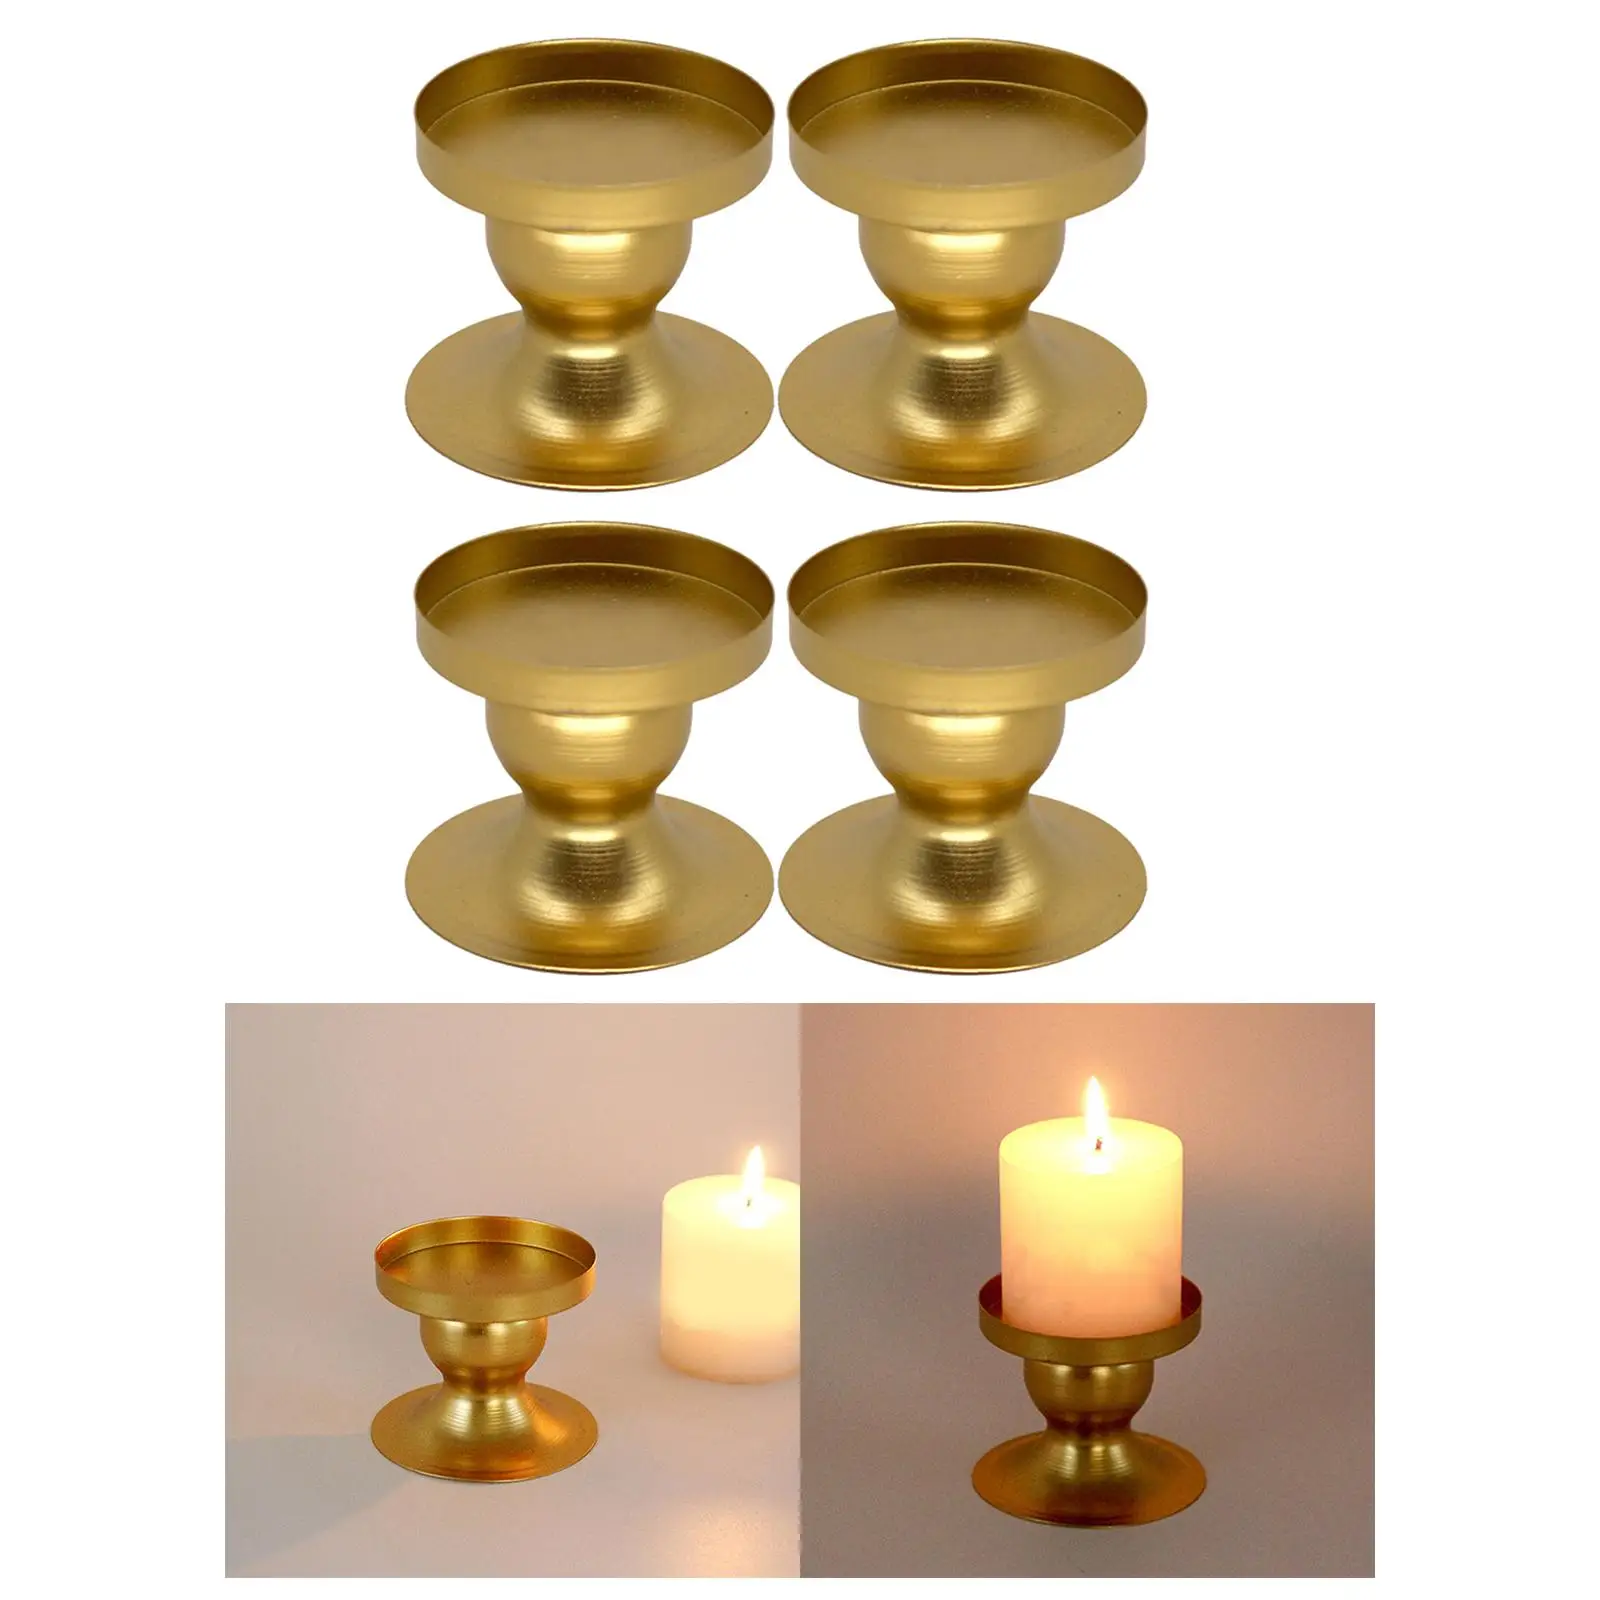 4Pcs Pillar Candle Candlestick Holder Metal Structure Home Decoration 2.4inch